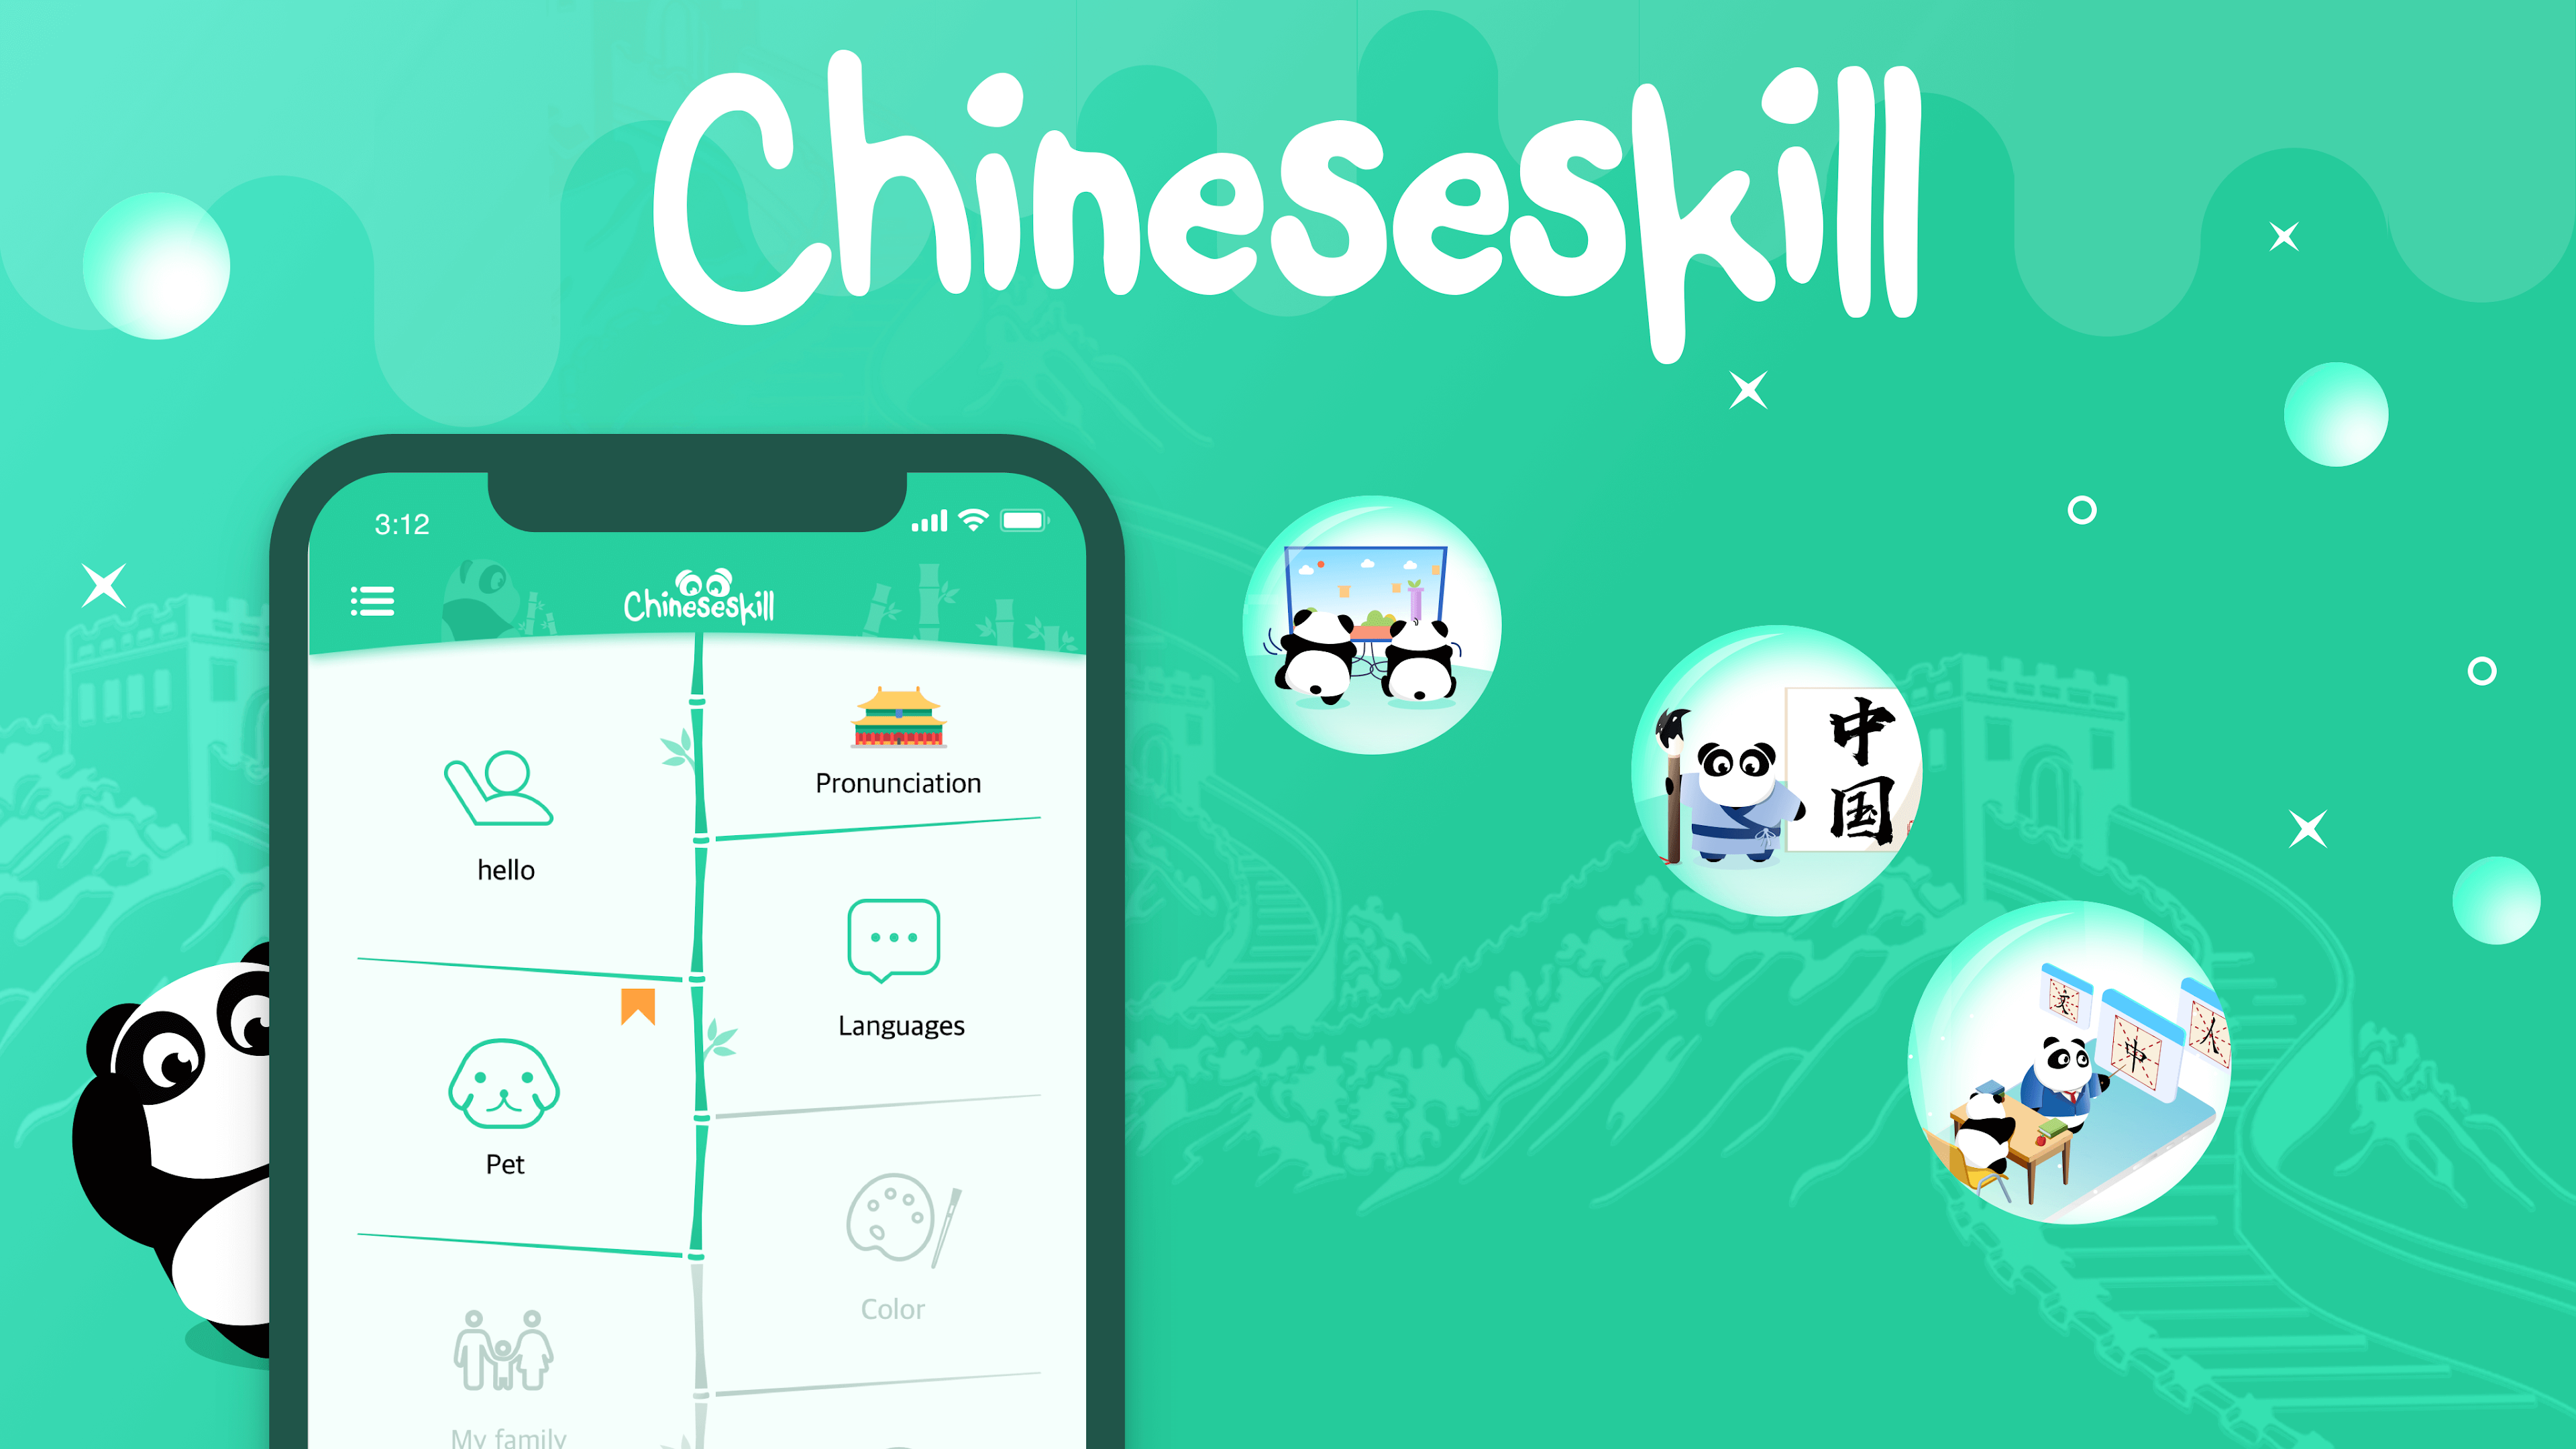 Android Apps by ChineseSkill - Learn Chinese Mandarin APPs on Google Play